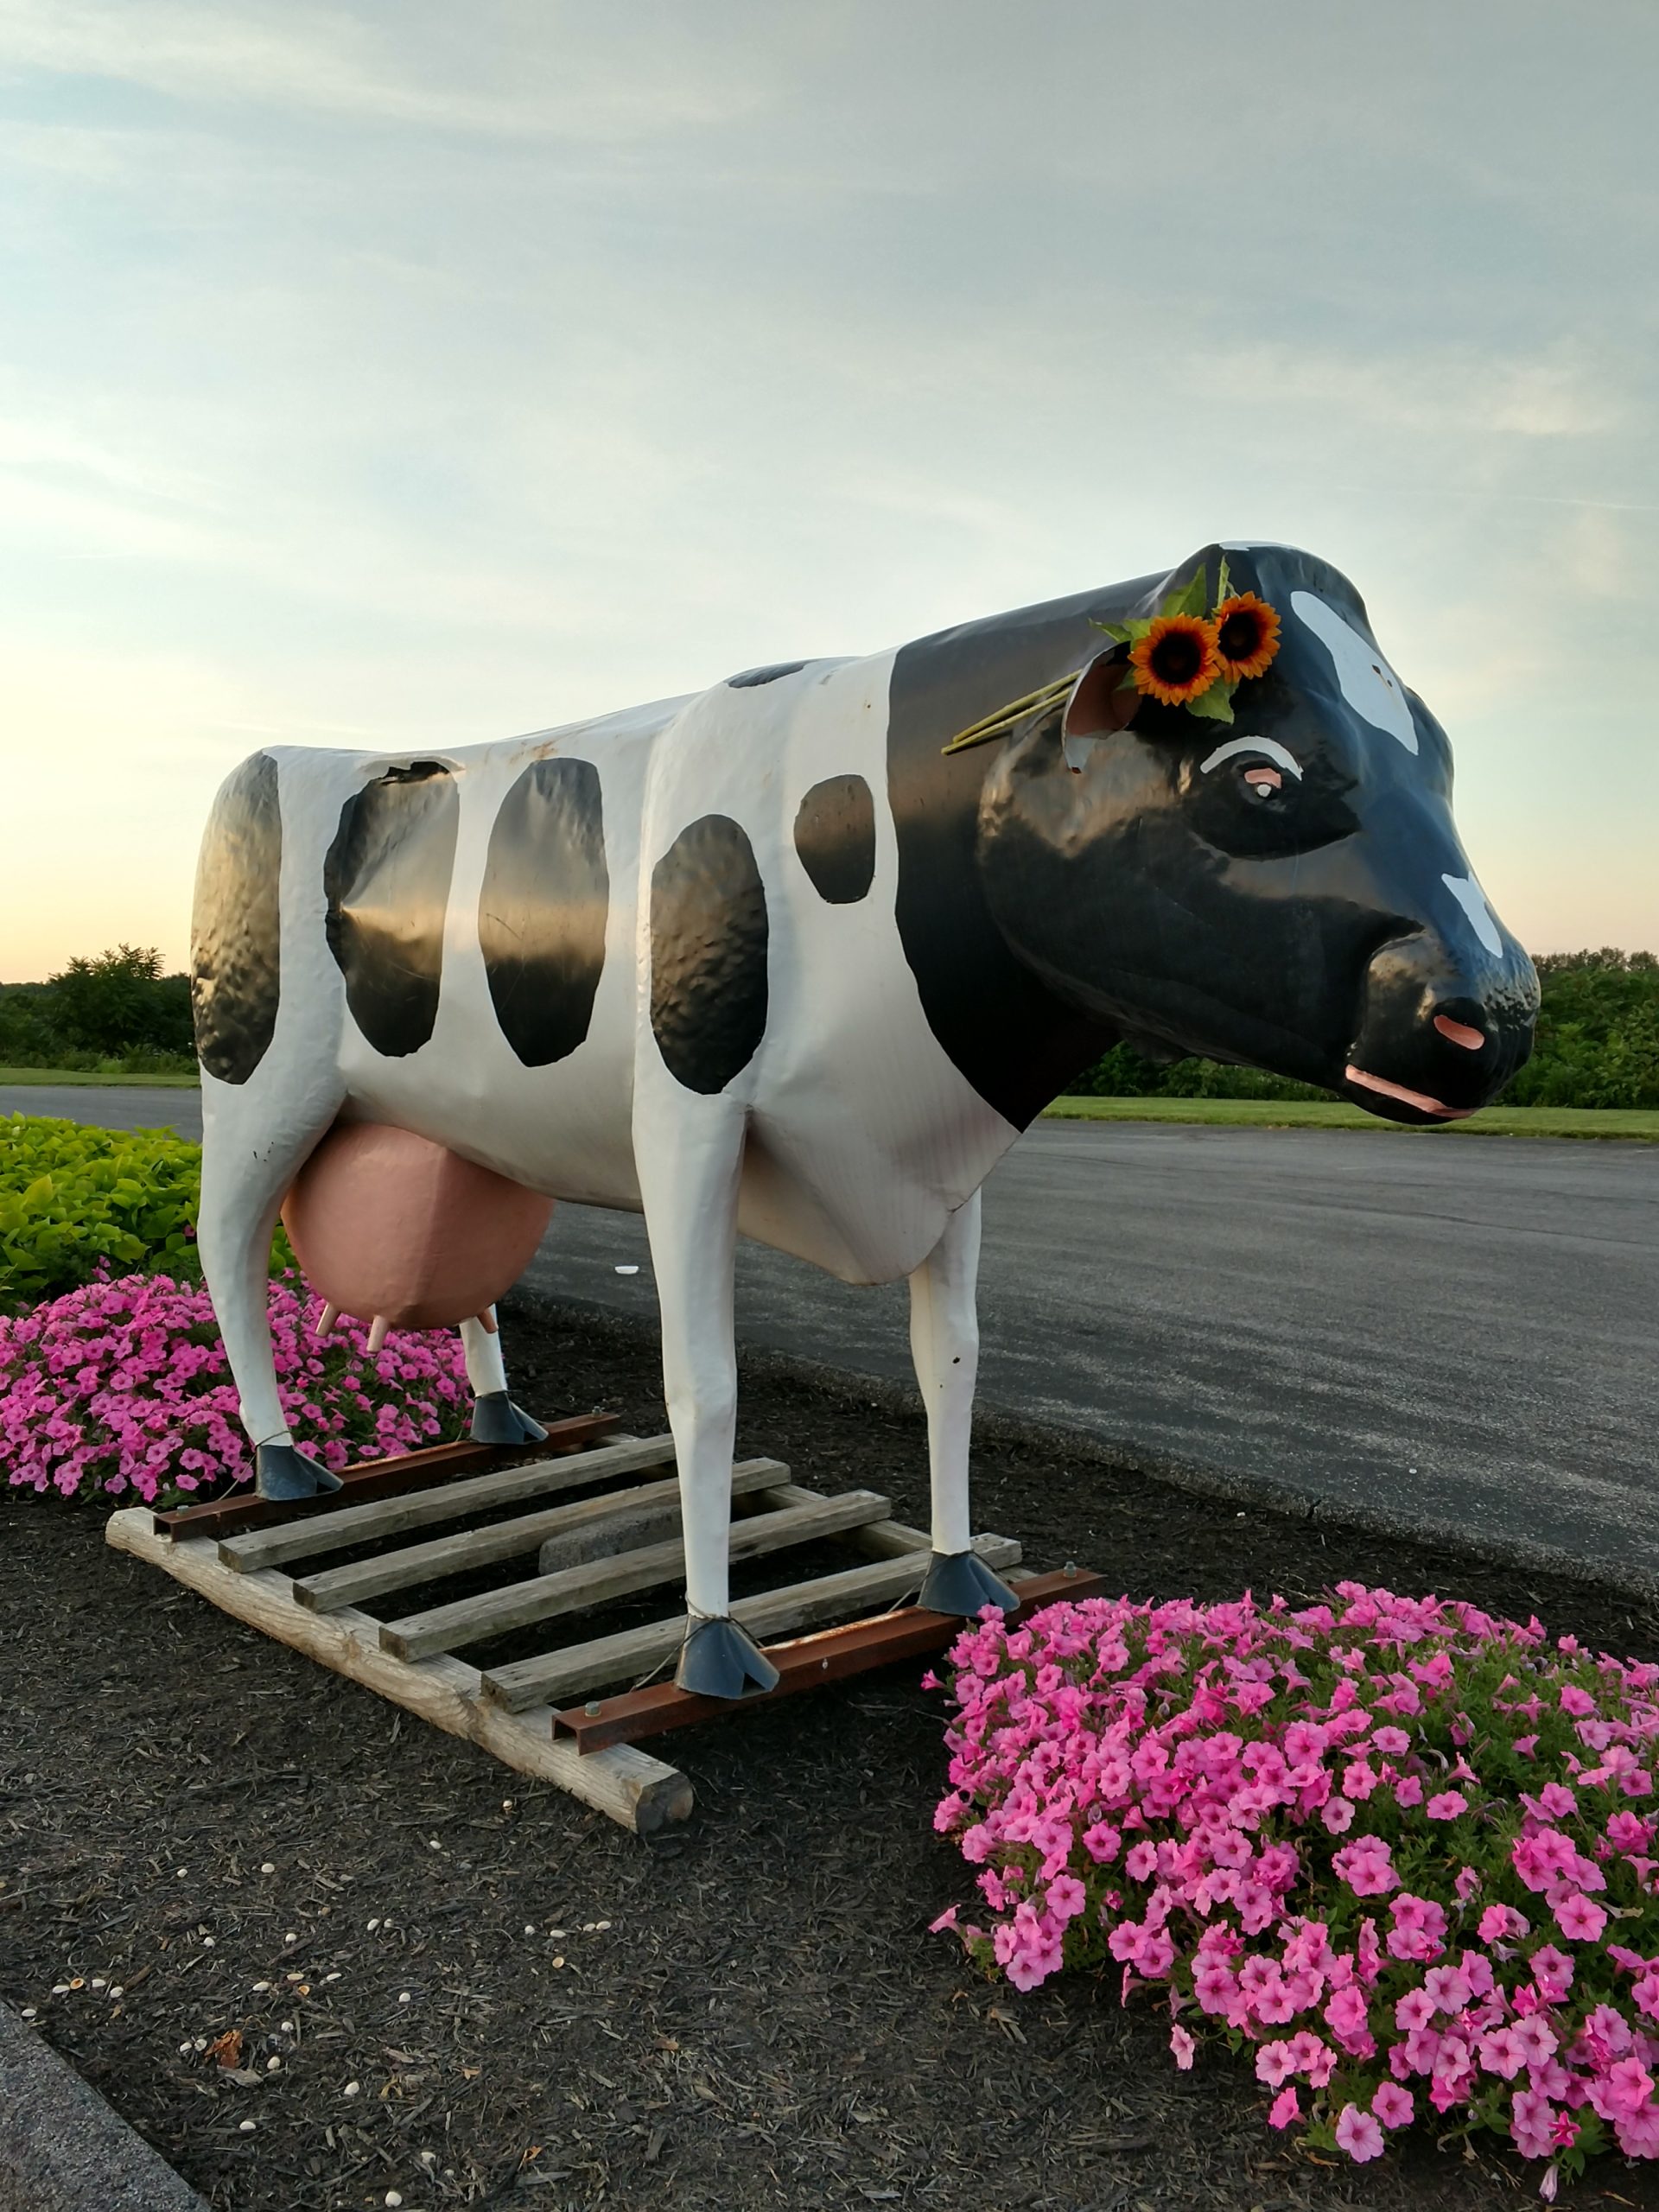 Name The Cow